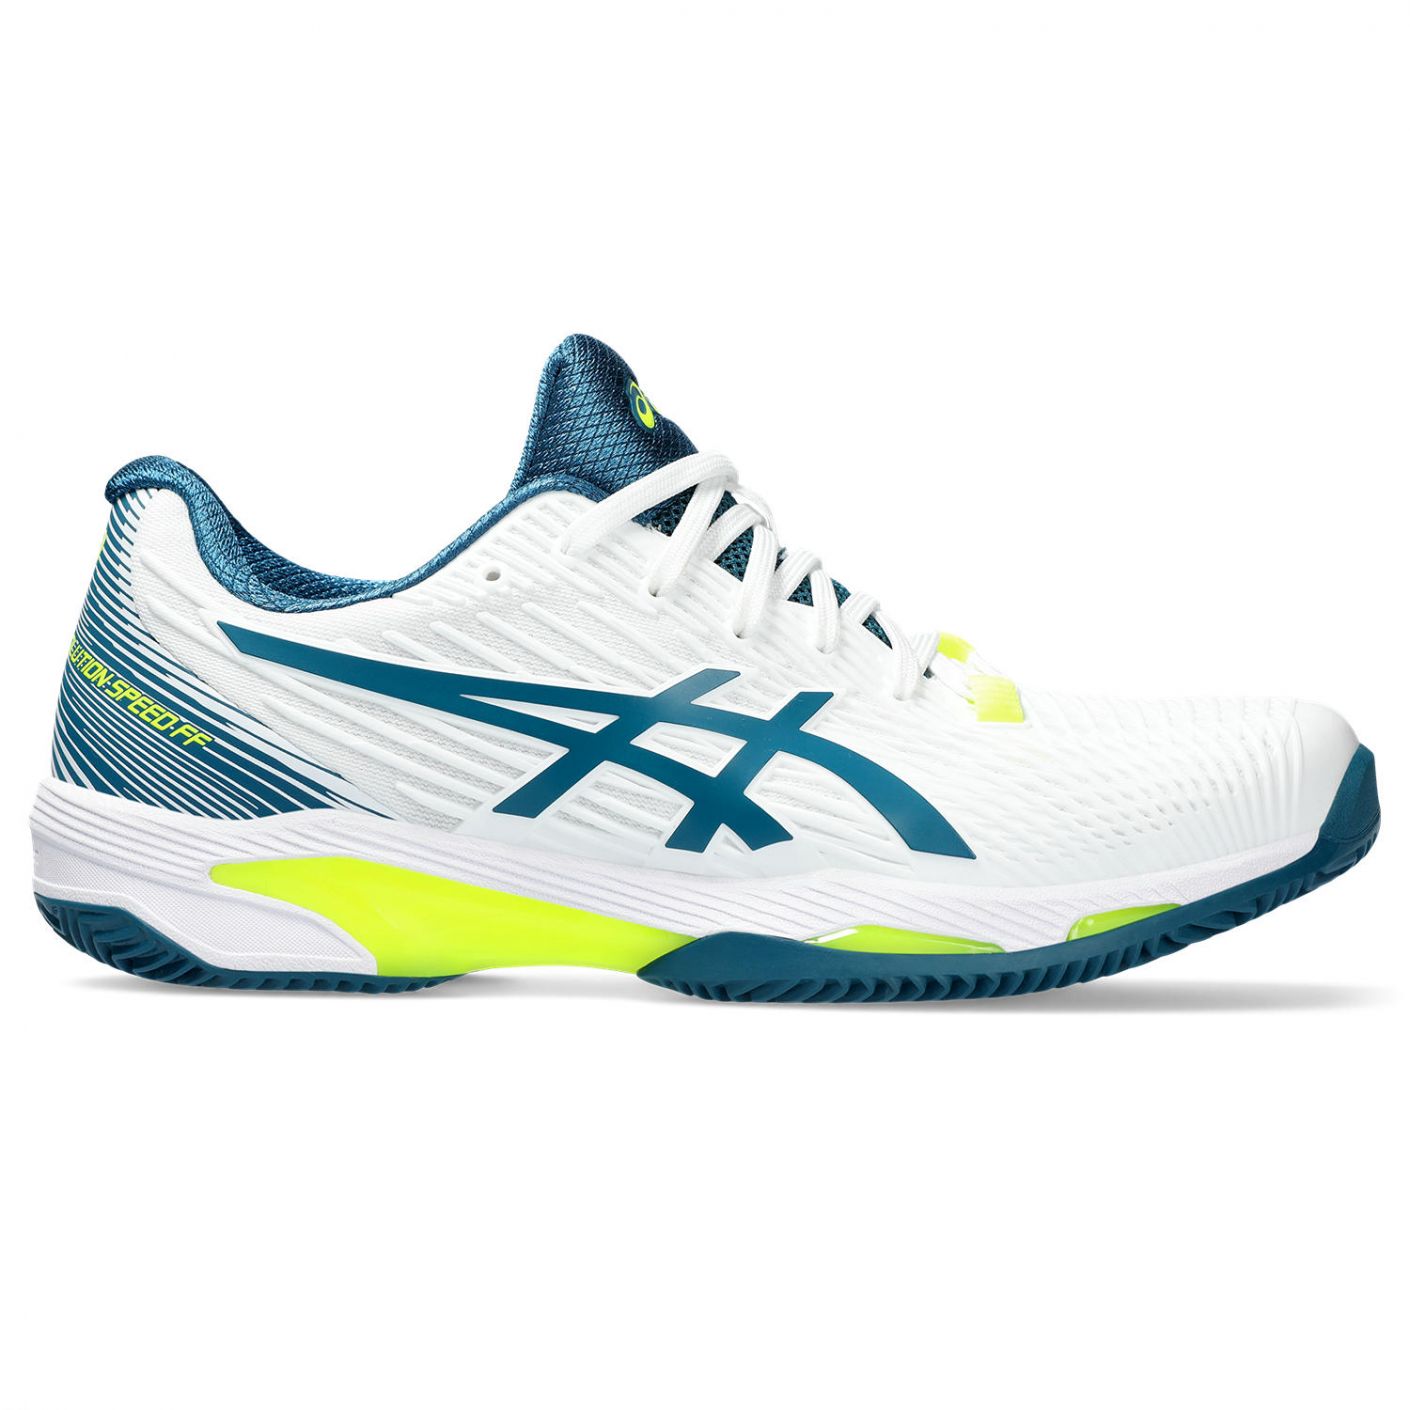 Asics Solution Speed Ff 2 Clay White/Restful Teal